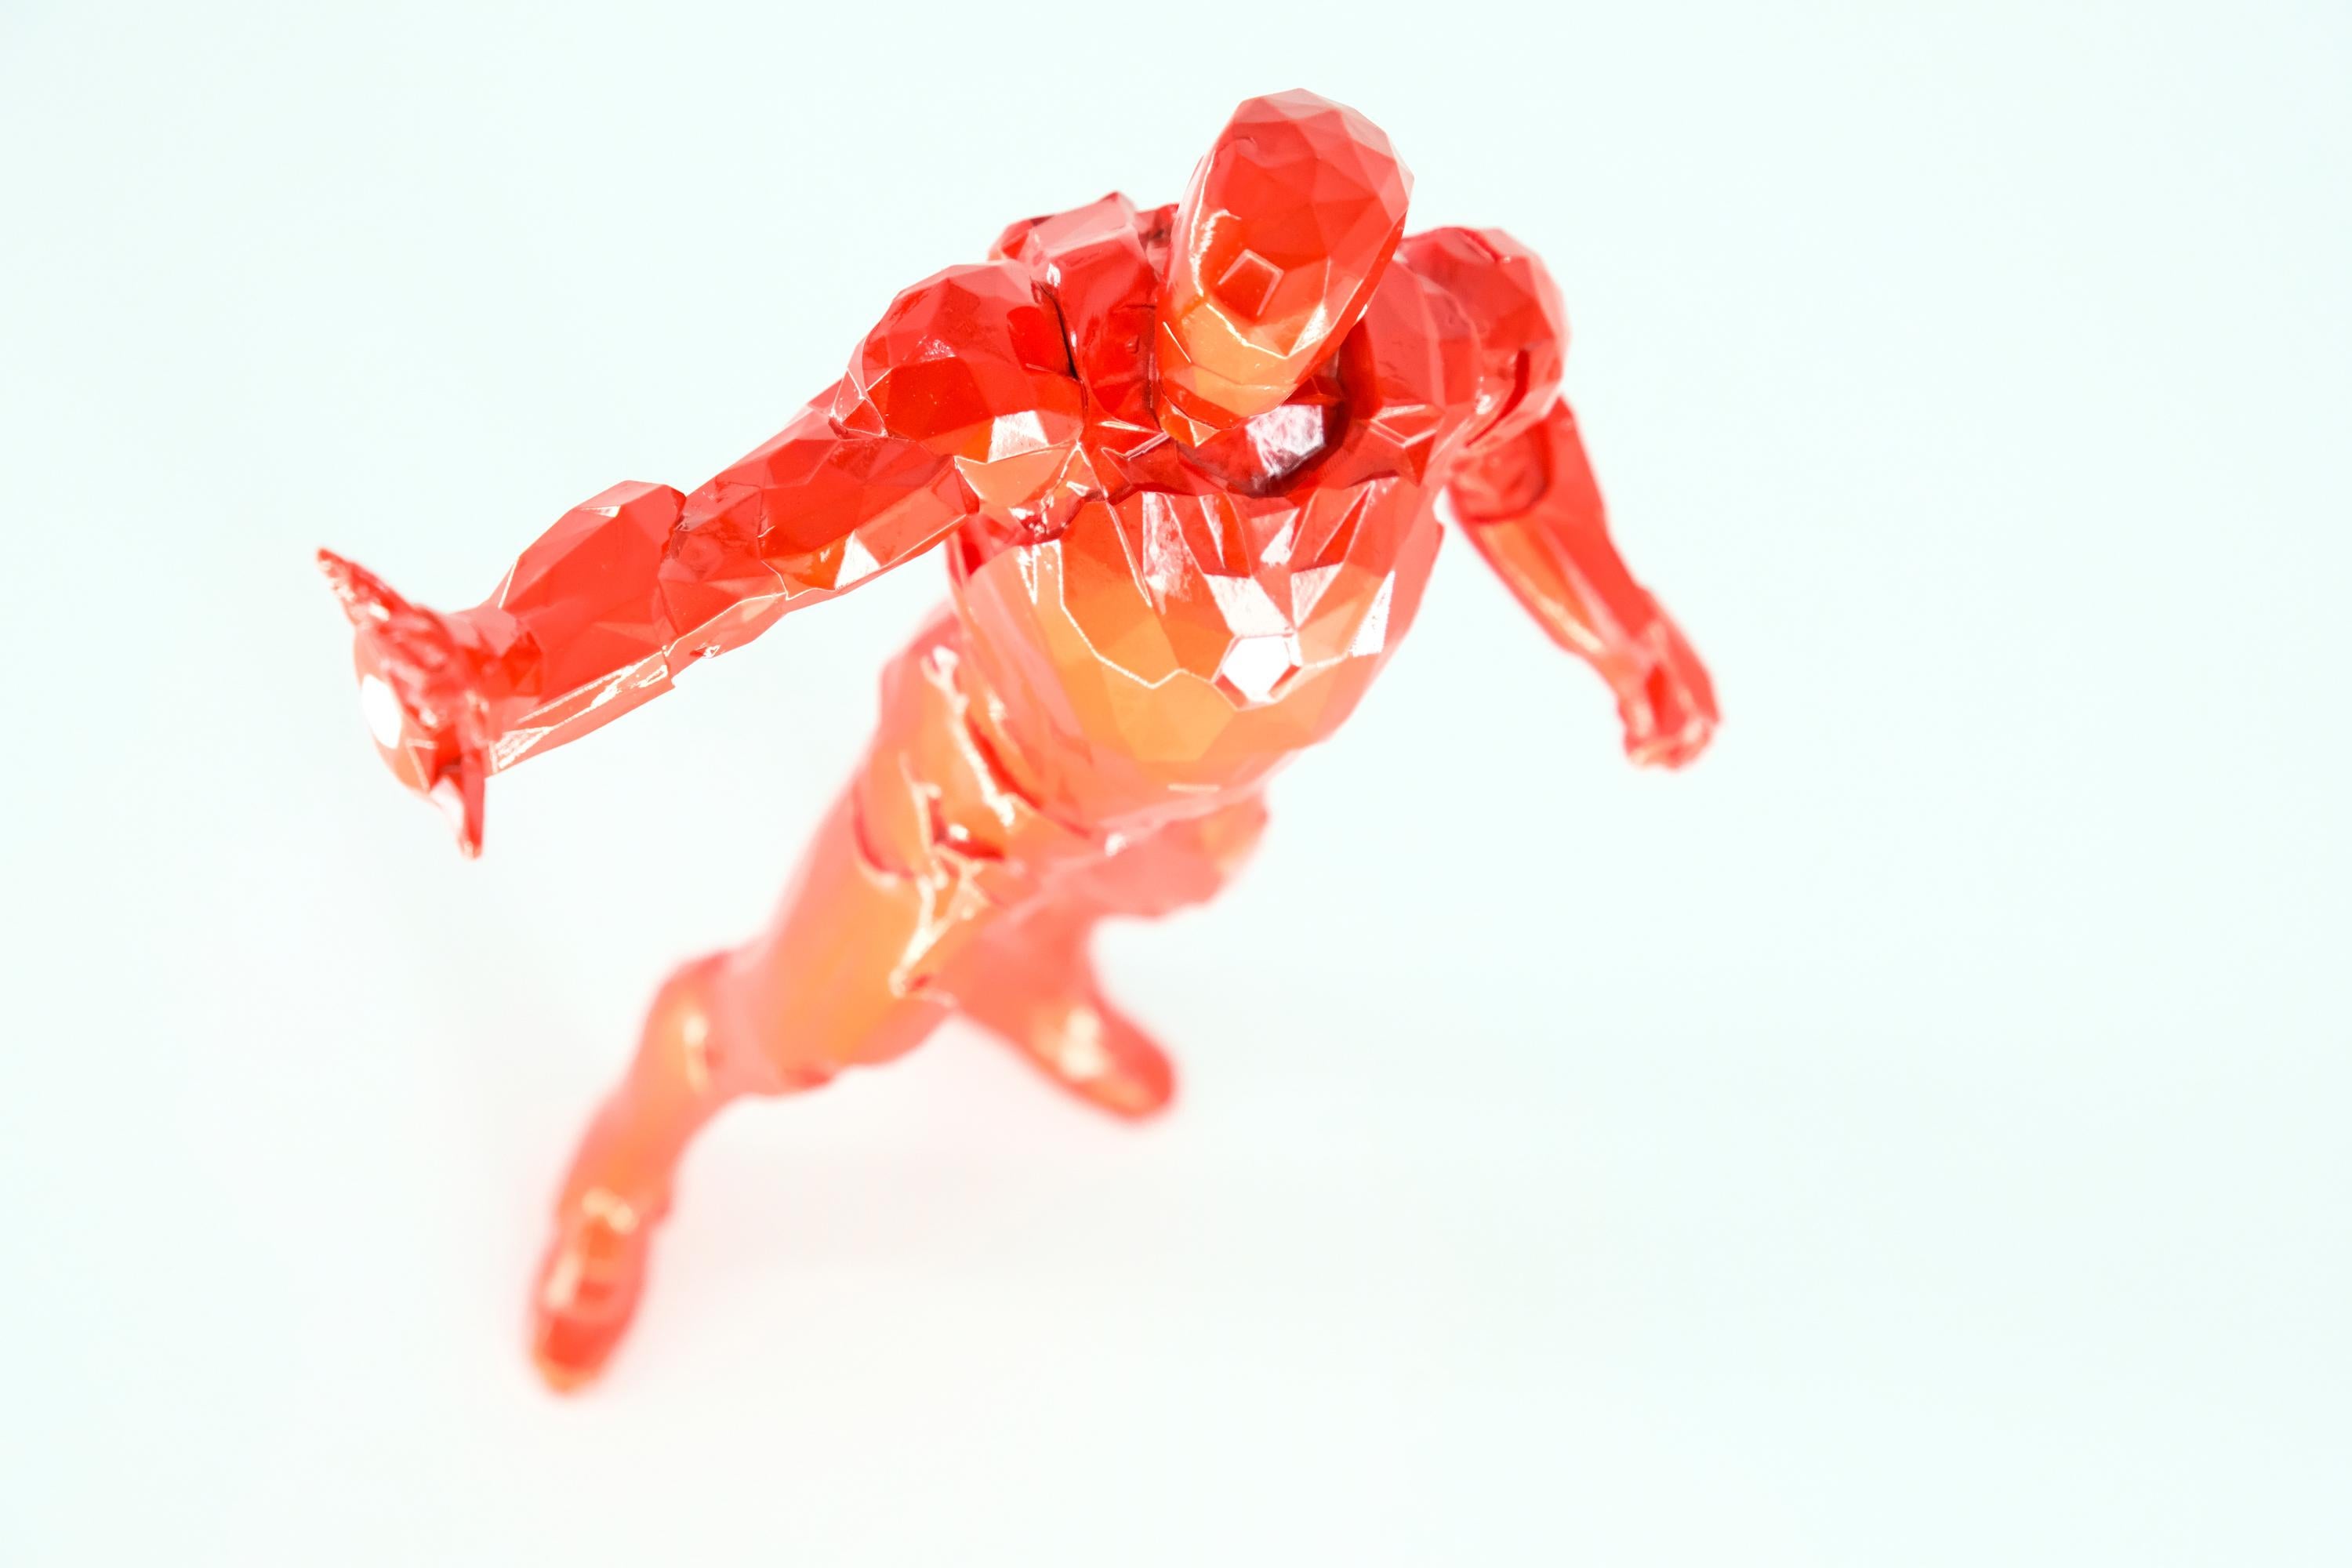 Richard ORLINSKI
Iron-Man

Sculpture in resin
Bright red
About 22 x 12 x 3 cm (c. 8.1 x 4.7 x 1.1 in)

Excellent condition